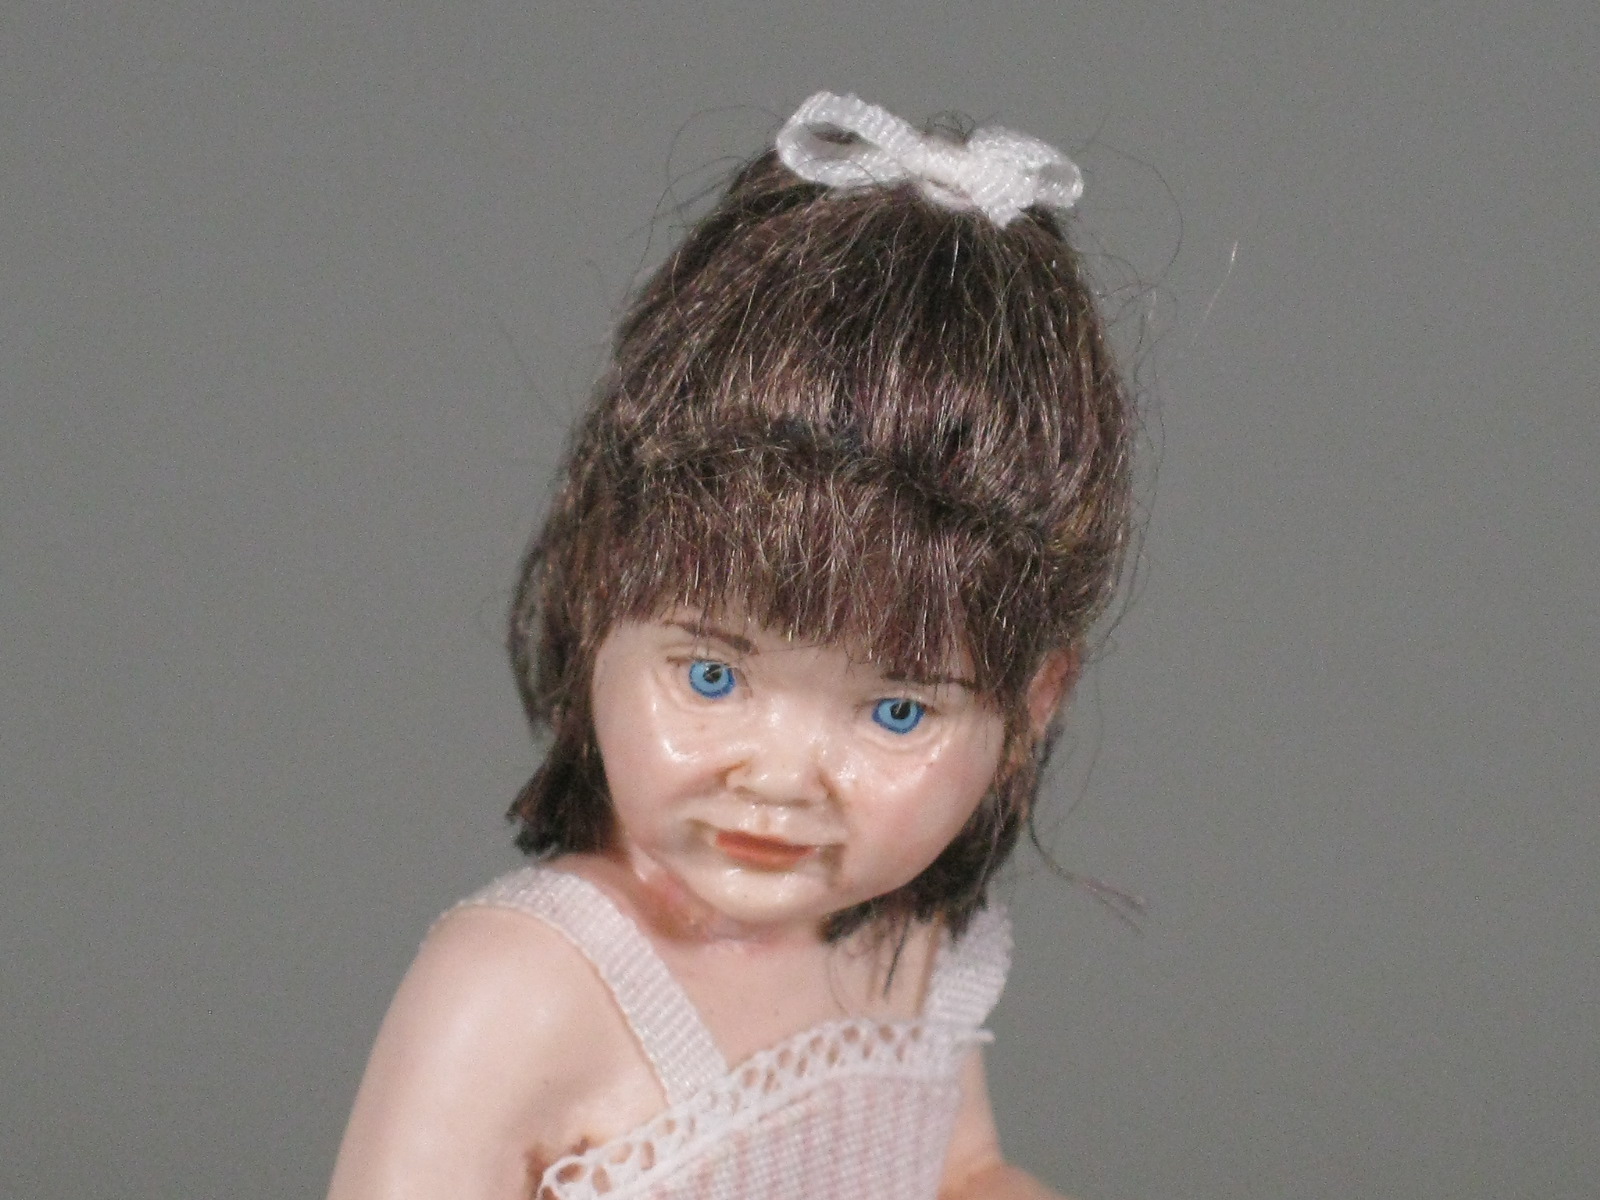 Susan Scogin Limited Edition Artist Doll Toddler Girl Resin Dollhouse Miniature 4